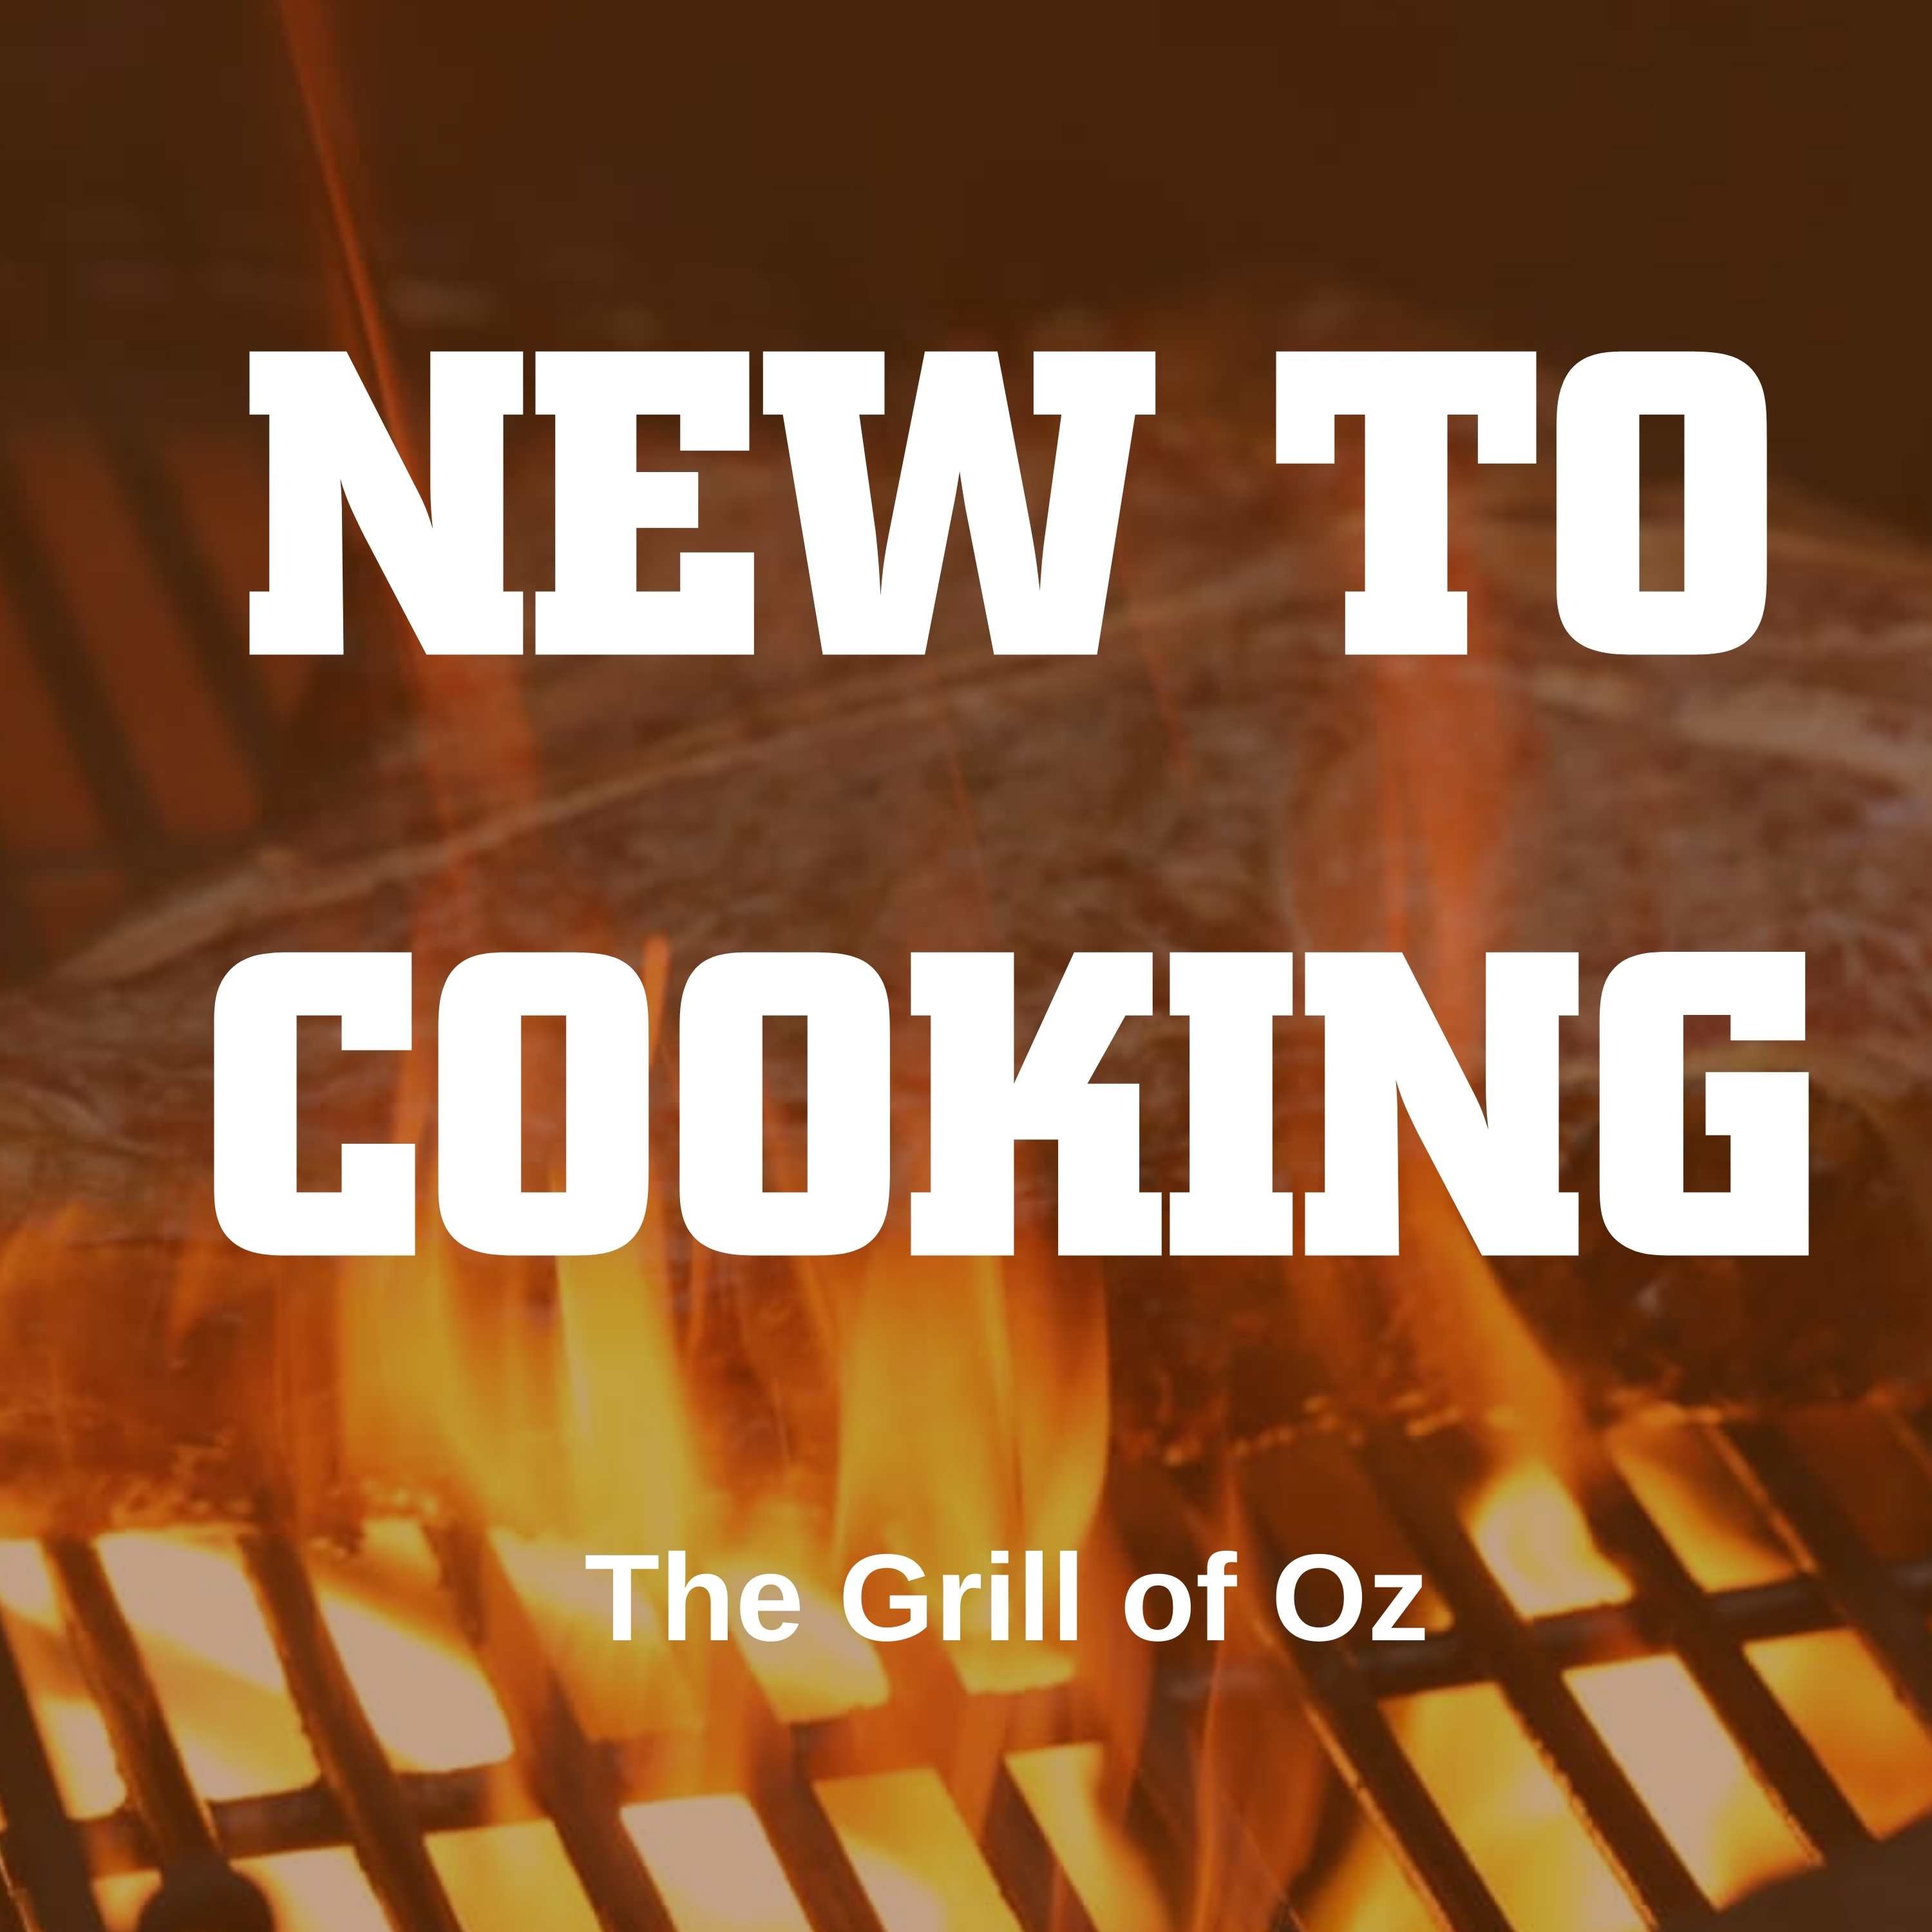 The Grill of Oz